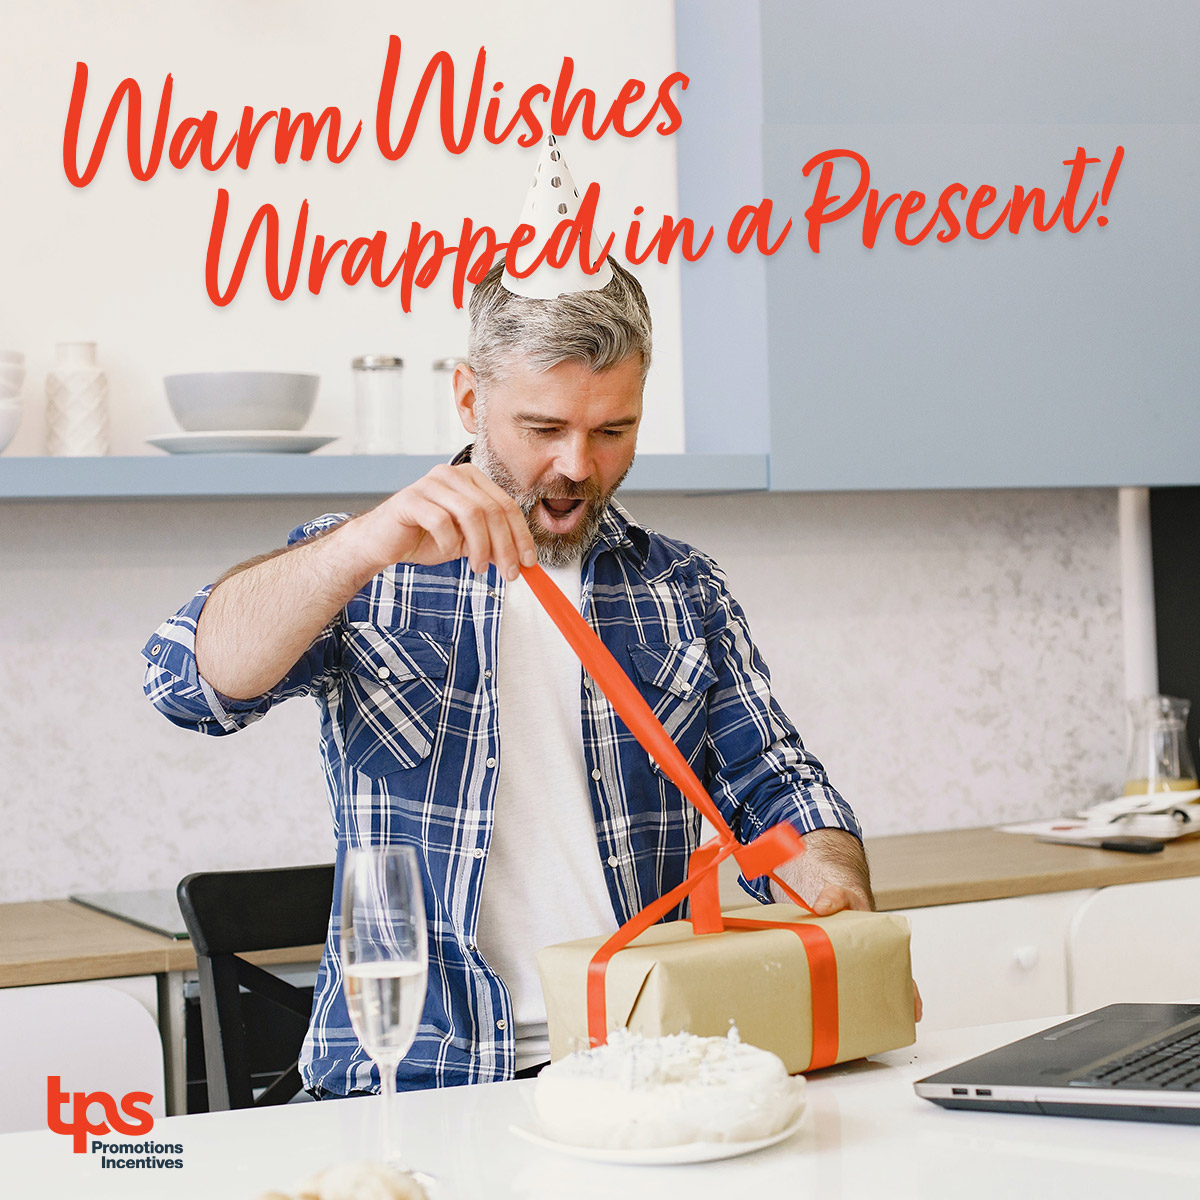 Sending warm wishes wrapped in a present to your incredible employees and valued customers! Check out the Top 10+ staff picks. Your support and appreciation light up the holiday. tpscan.com/warm-wishes-wr… #holidaygifting #holidaygifts #employeeappreciation #corporategifting